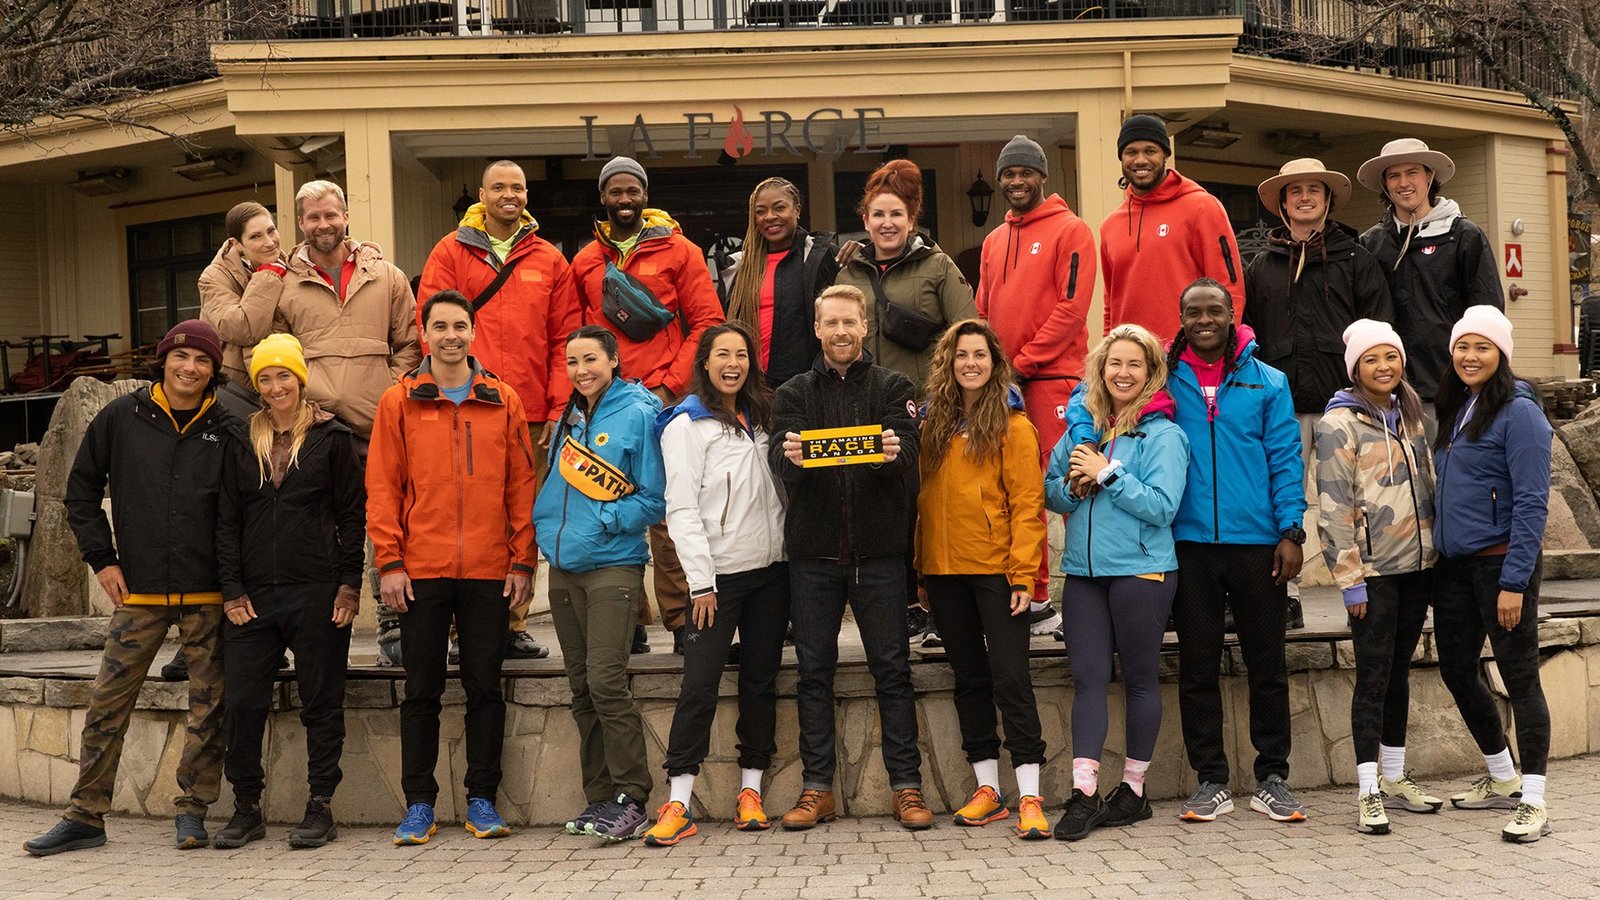 How to appply for Amazing Race Canada Audition season 10 2024?